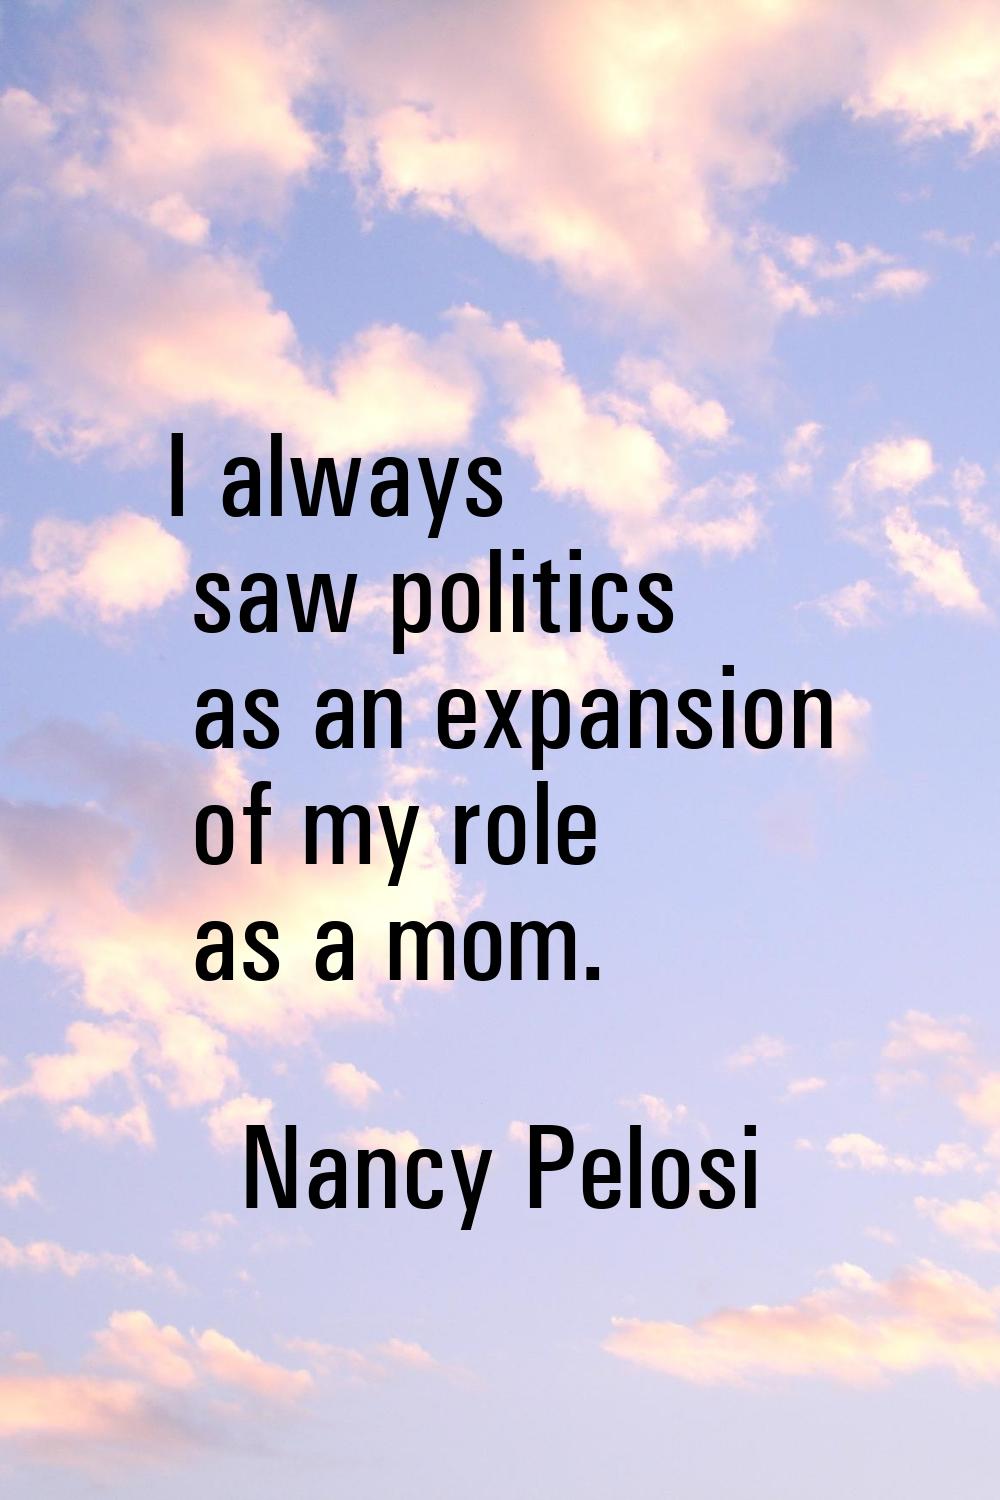 I always saw politics as an expansion of my role as a mom.